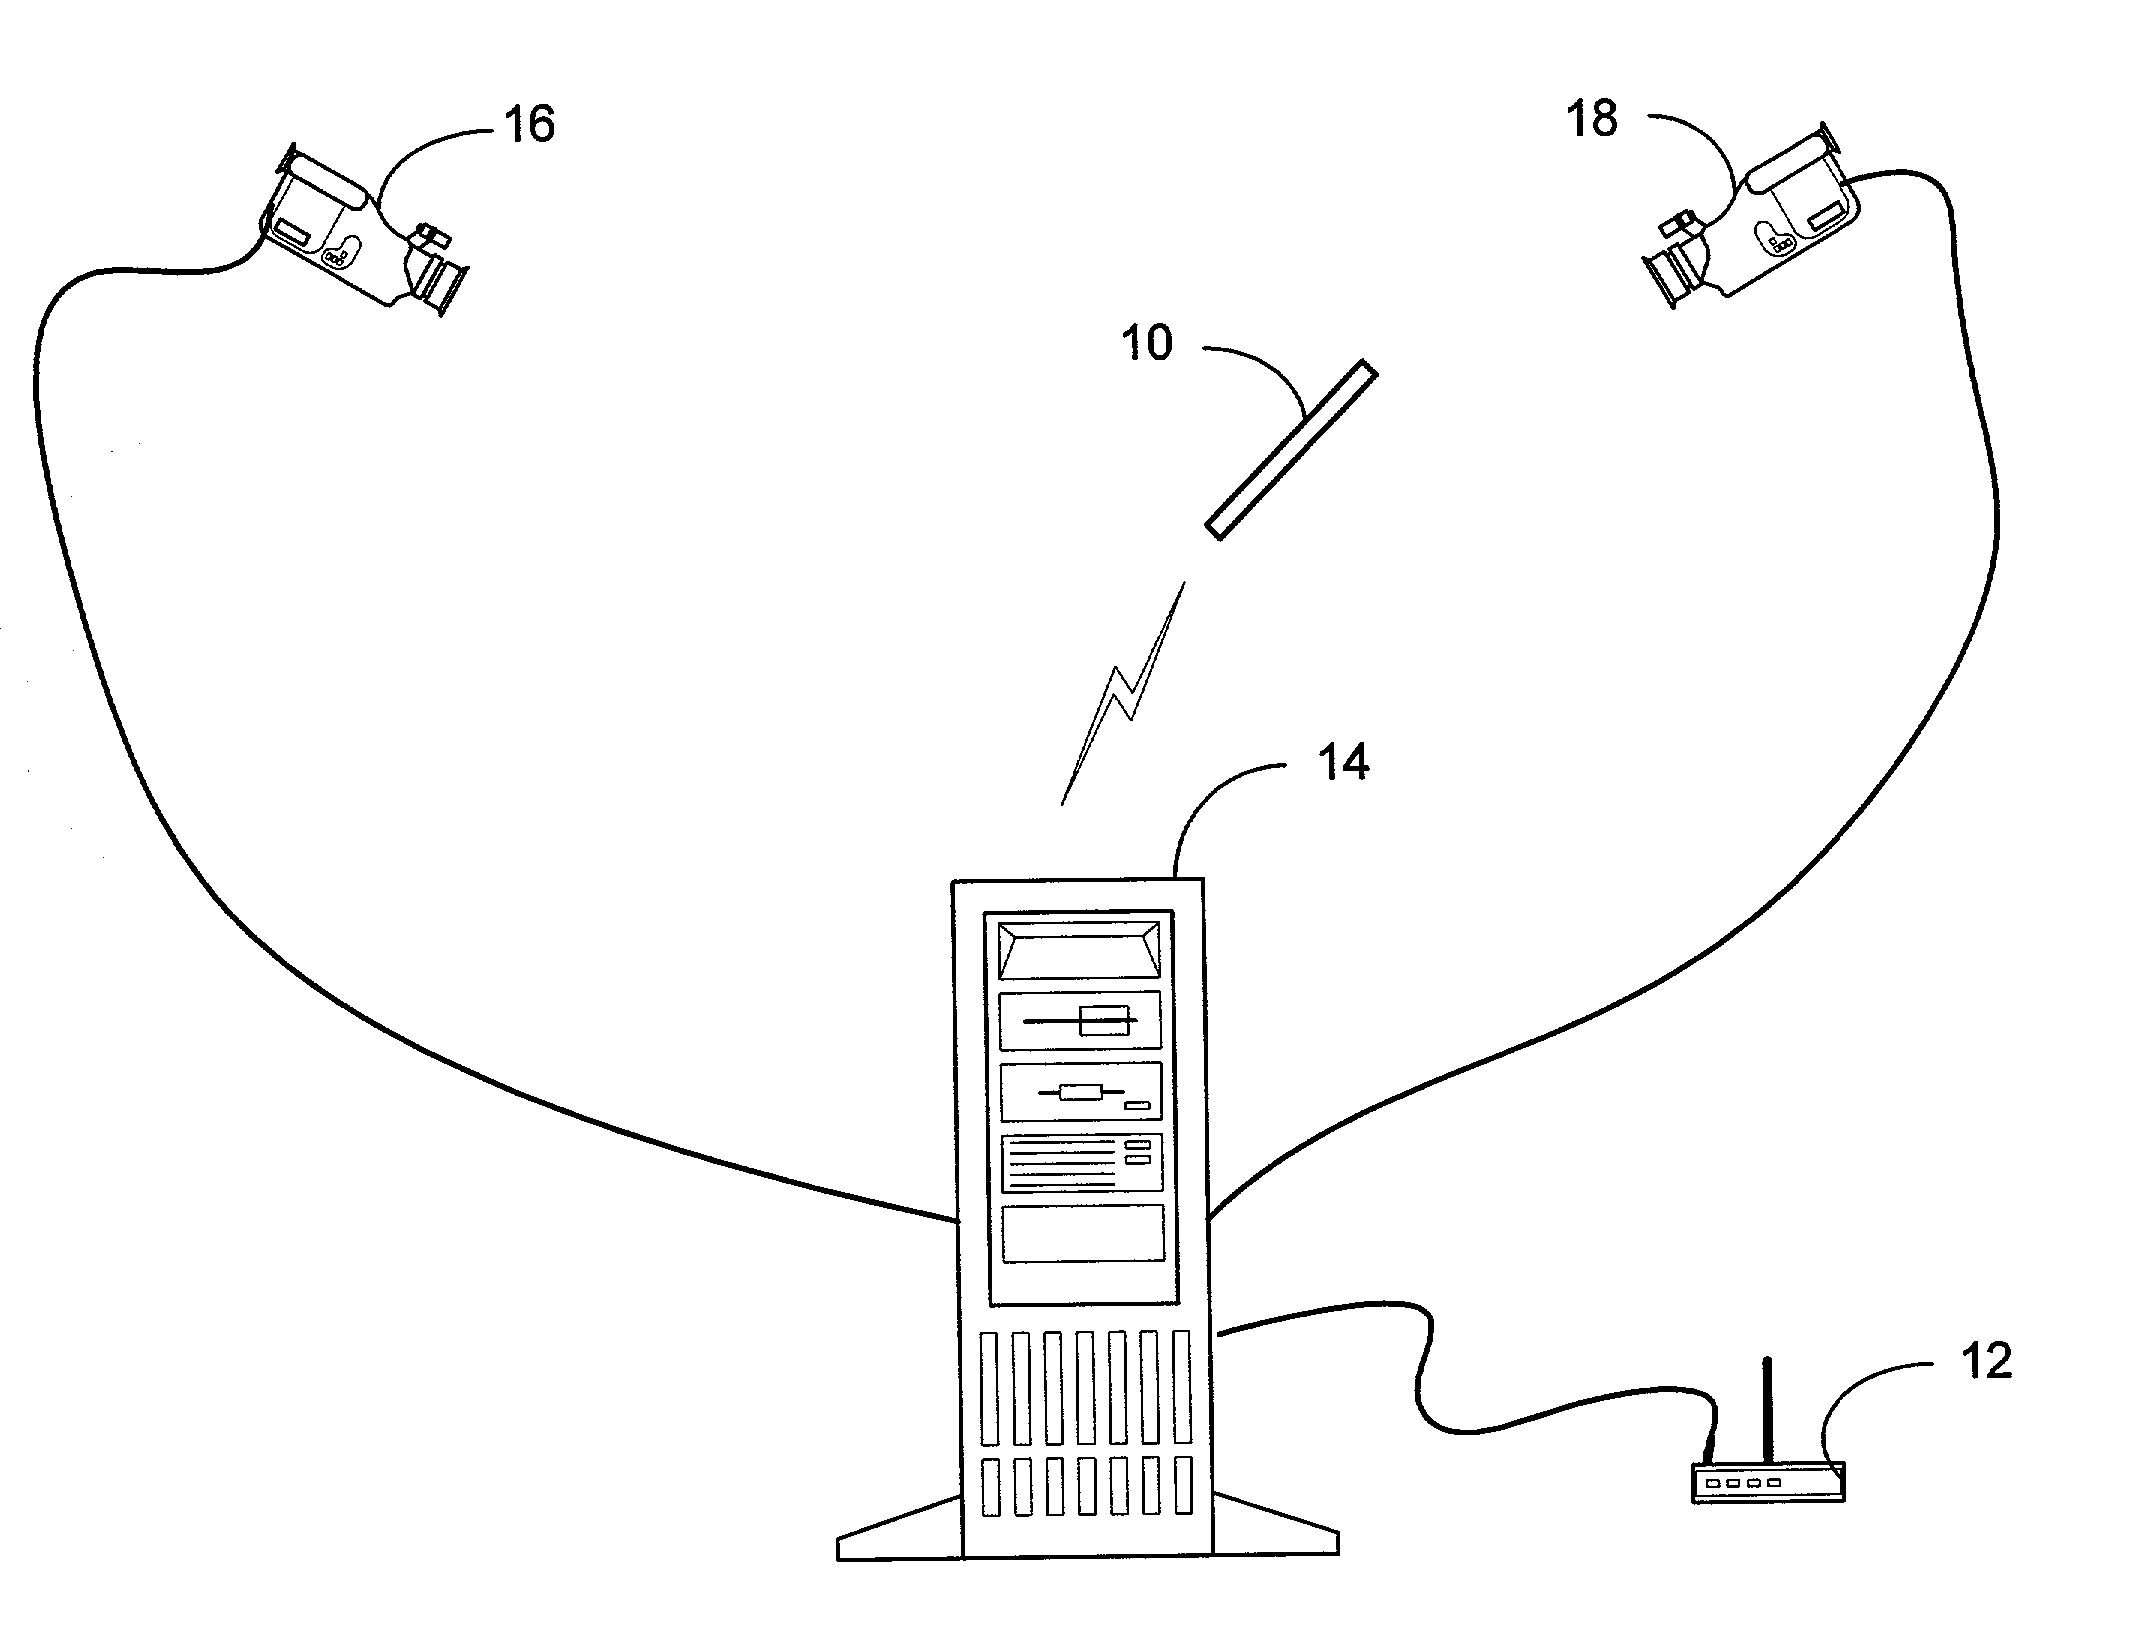 System and process for controlling electronic components in a ubiquitous computing environment using multimodal integration